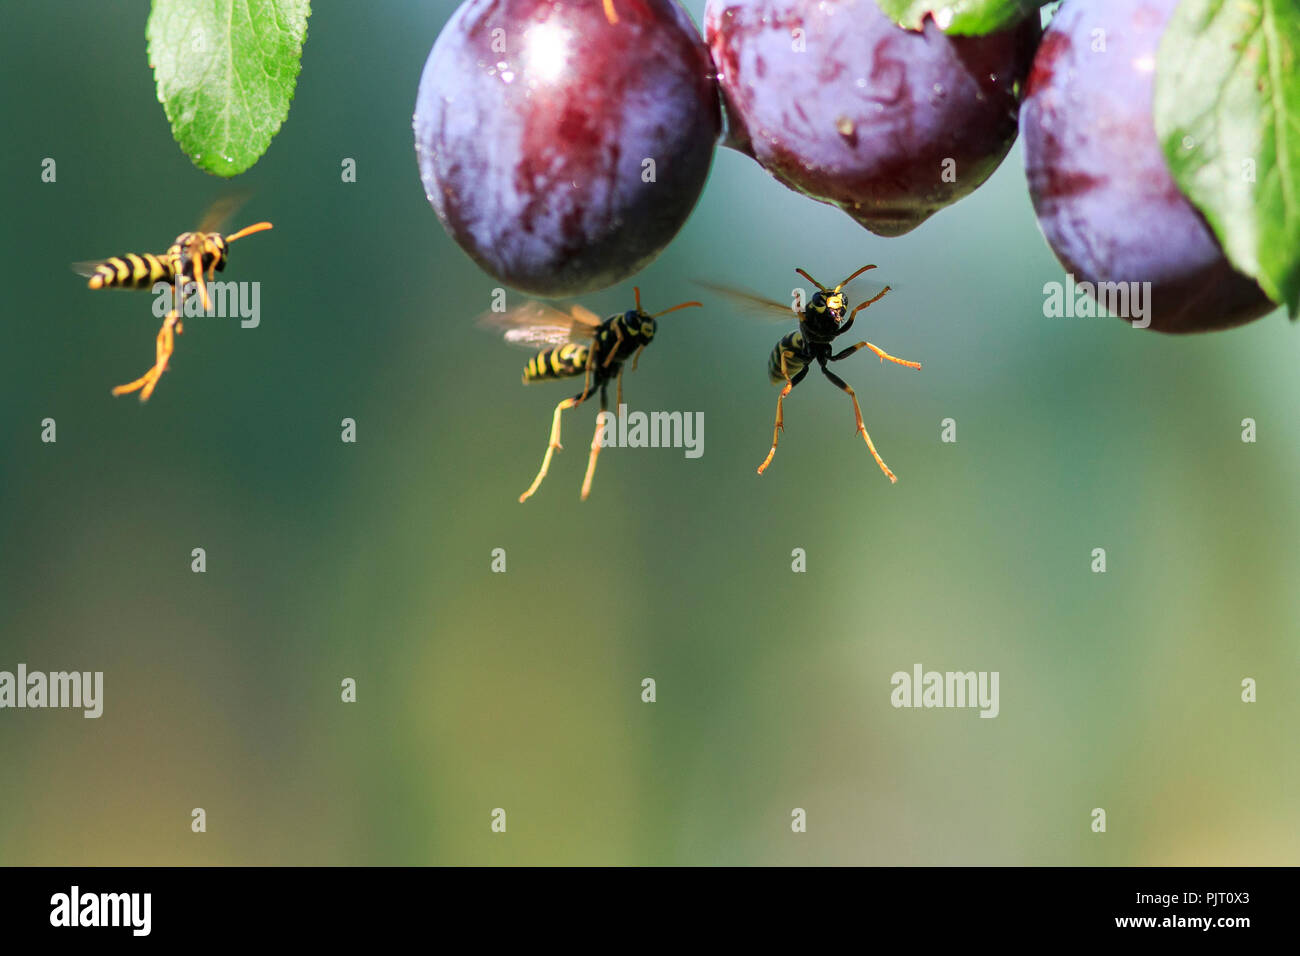 striped dangerous insects wasps flew in a garden on a branch with a crop of ripe purple fruits plums ripe them on a summer day Stock Photo